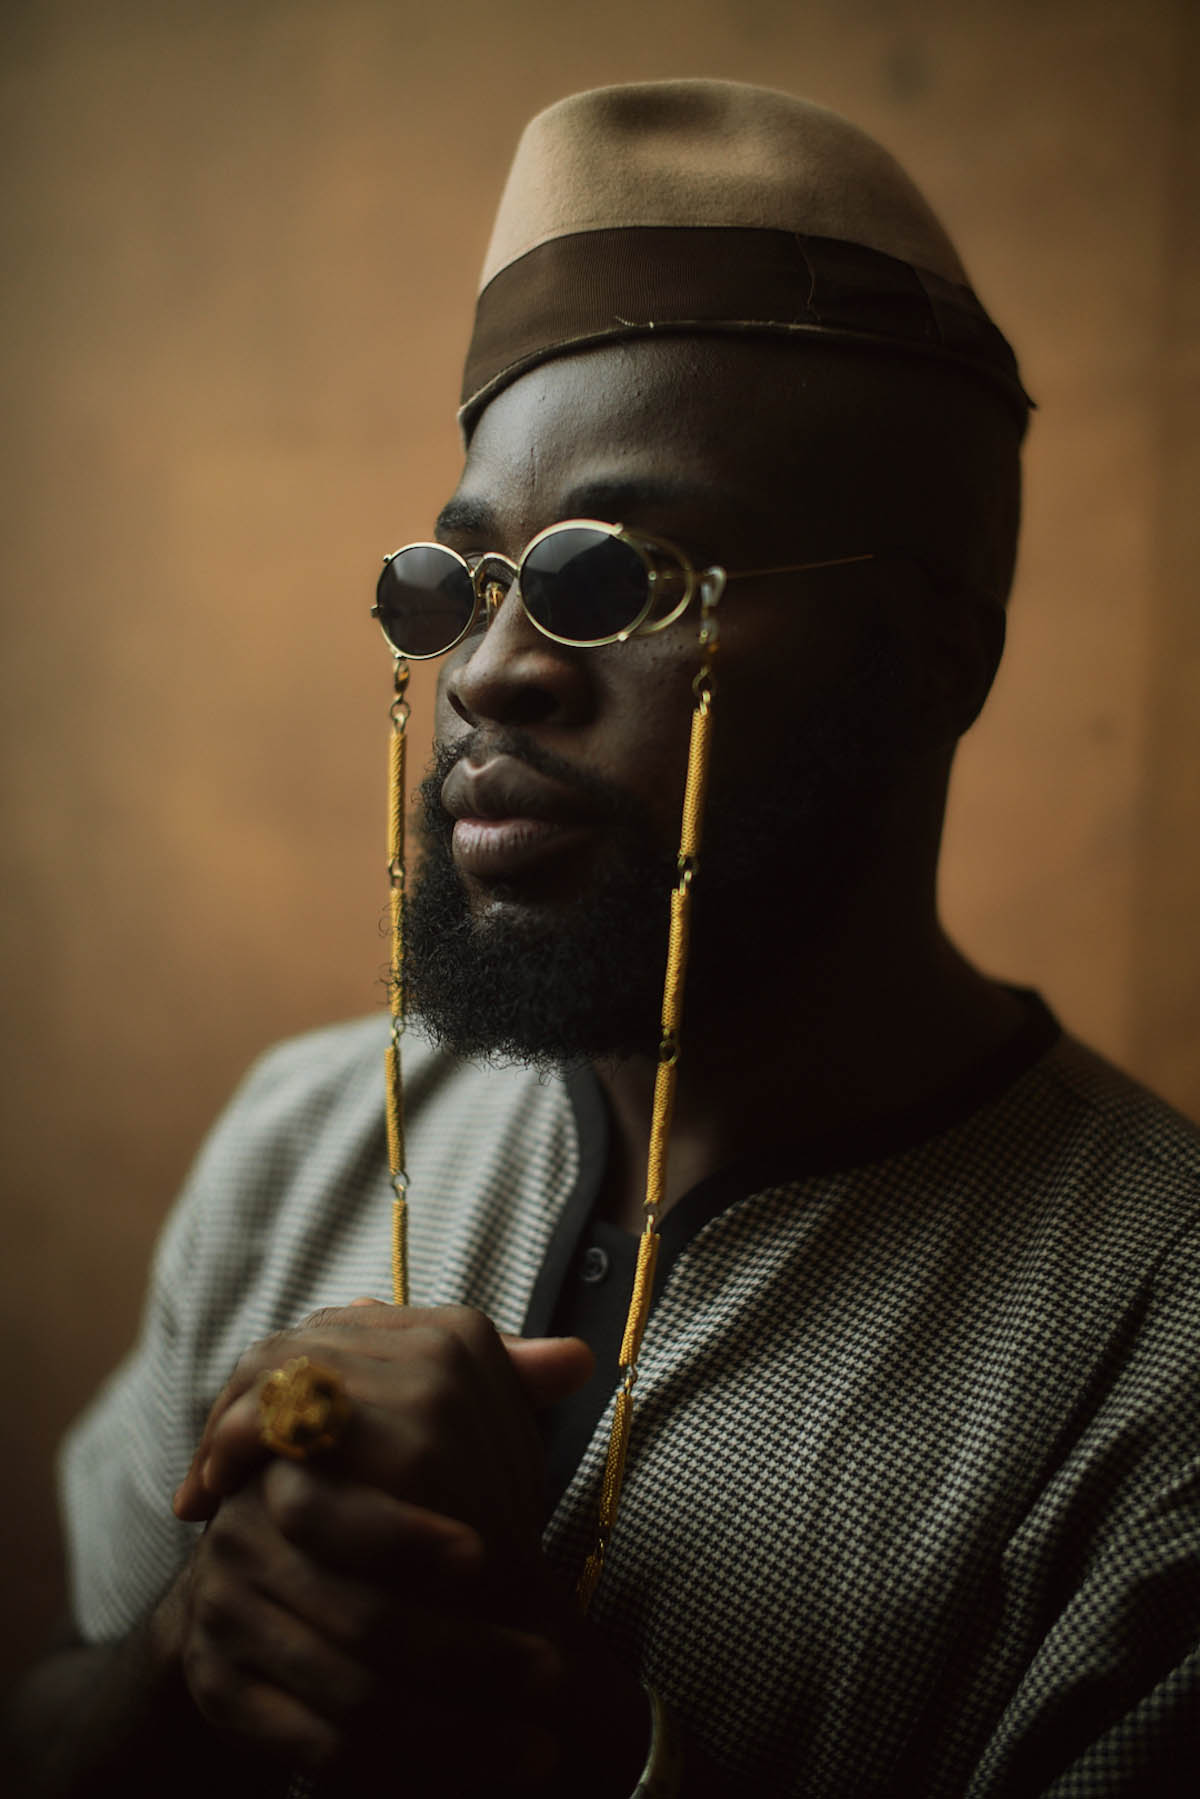 M.anifest is seen in a semi-close-up shot. He has his hands clasped together in front of his chest. He has a full black beard, wears sunglasses with gold frames and a yellow band hanging down next to his face. On his head he wears a hat without brim in light and dark brown.